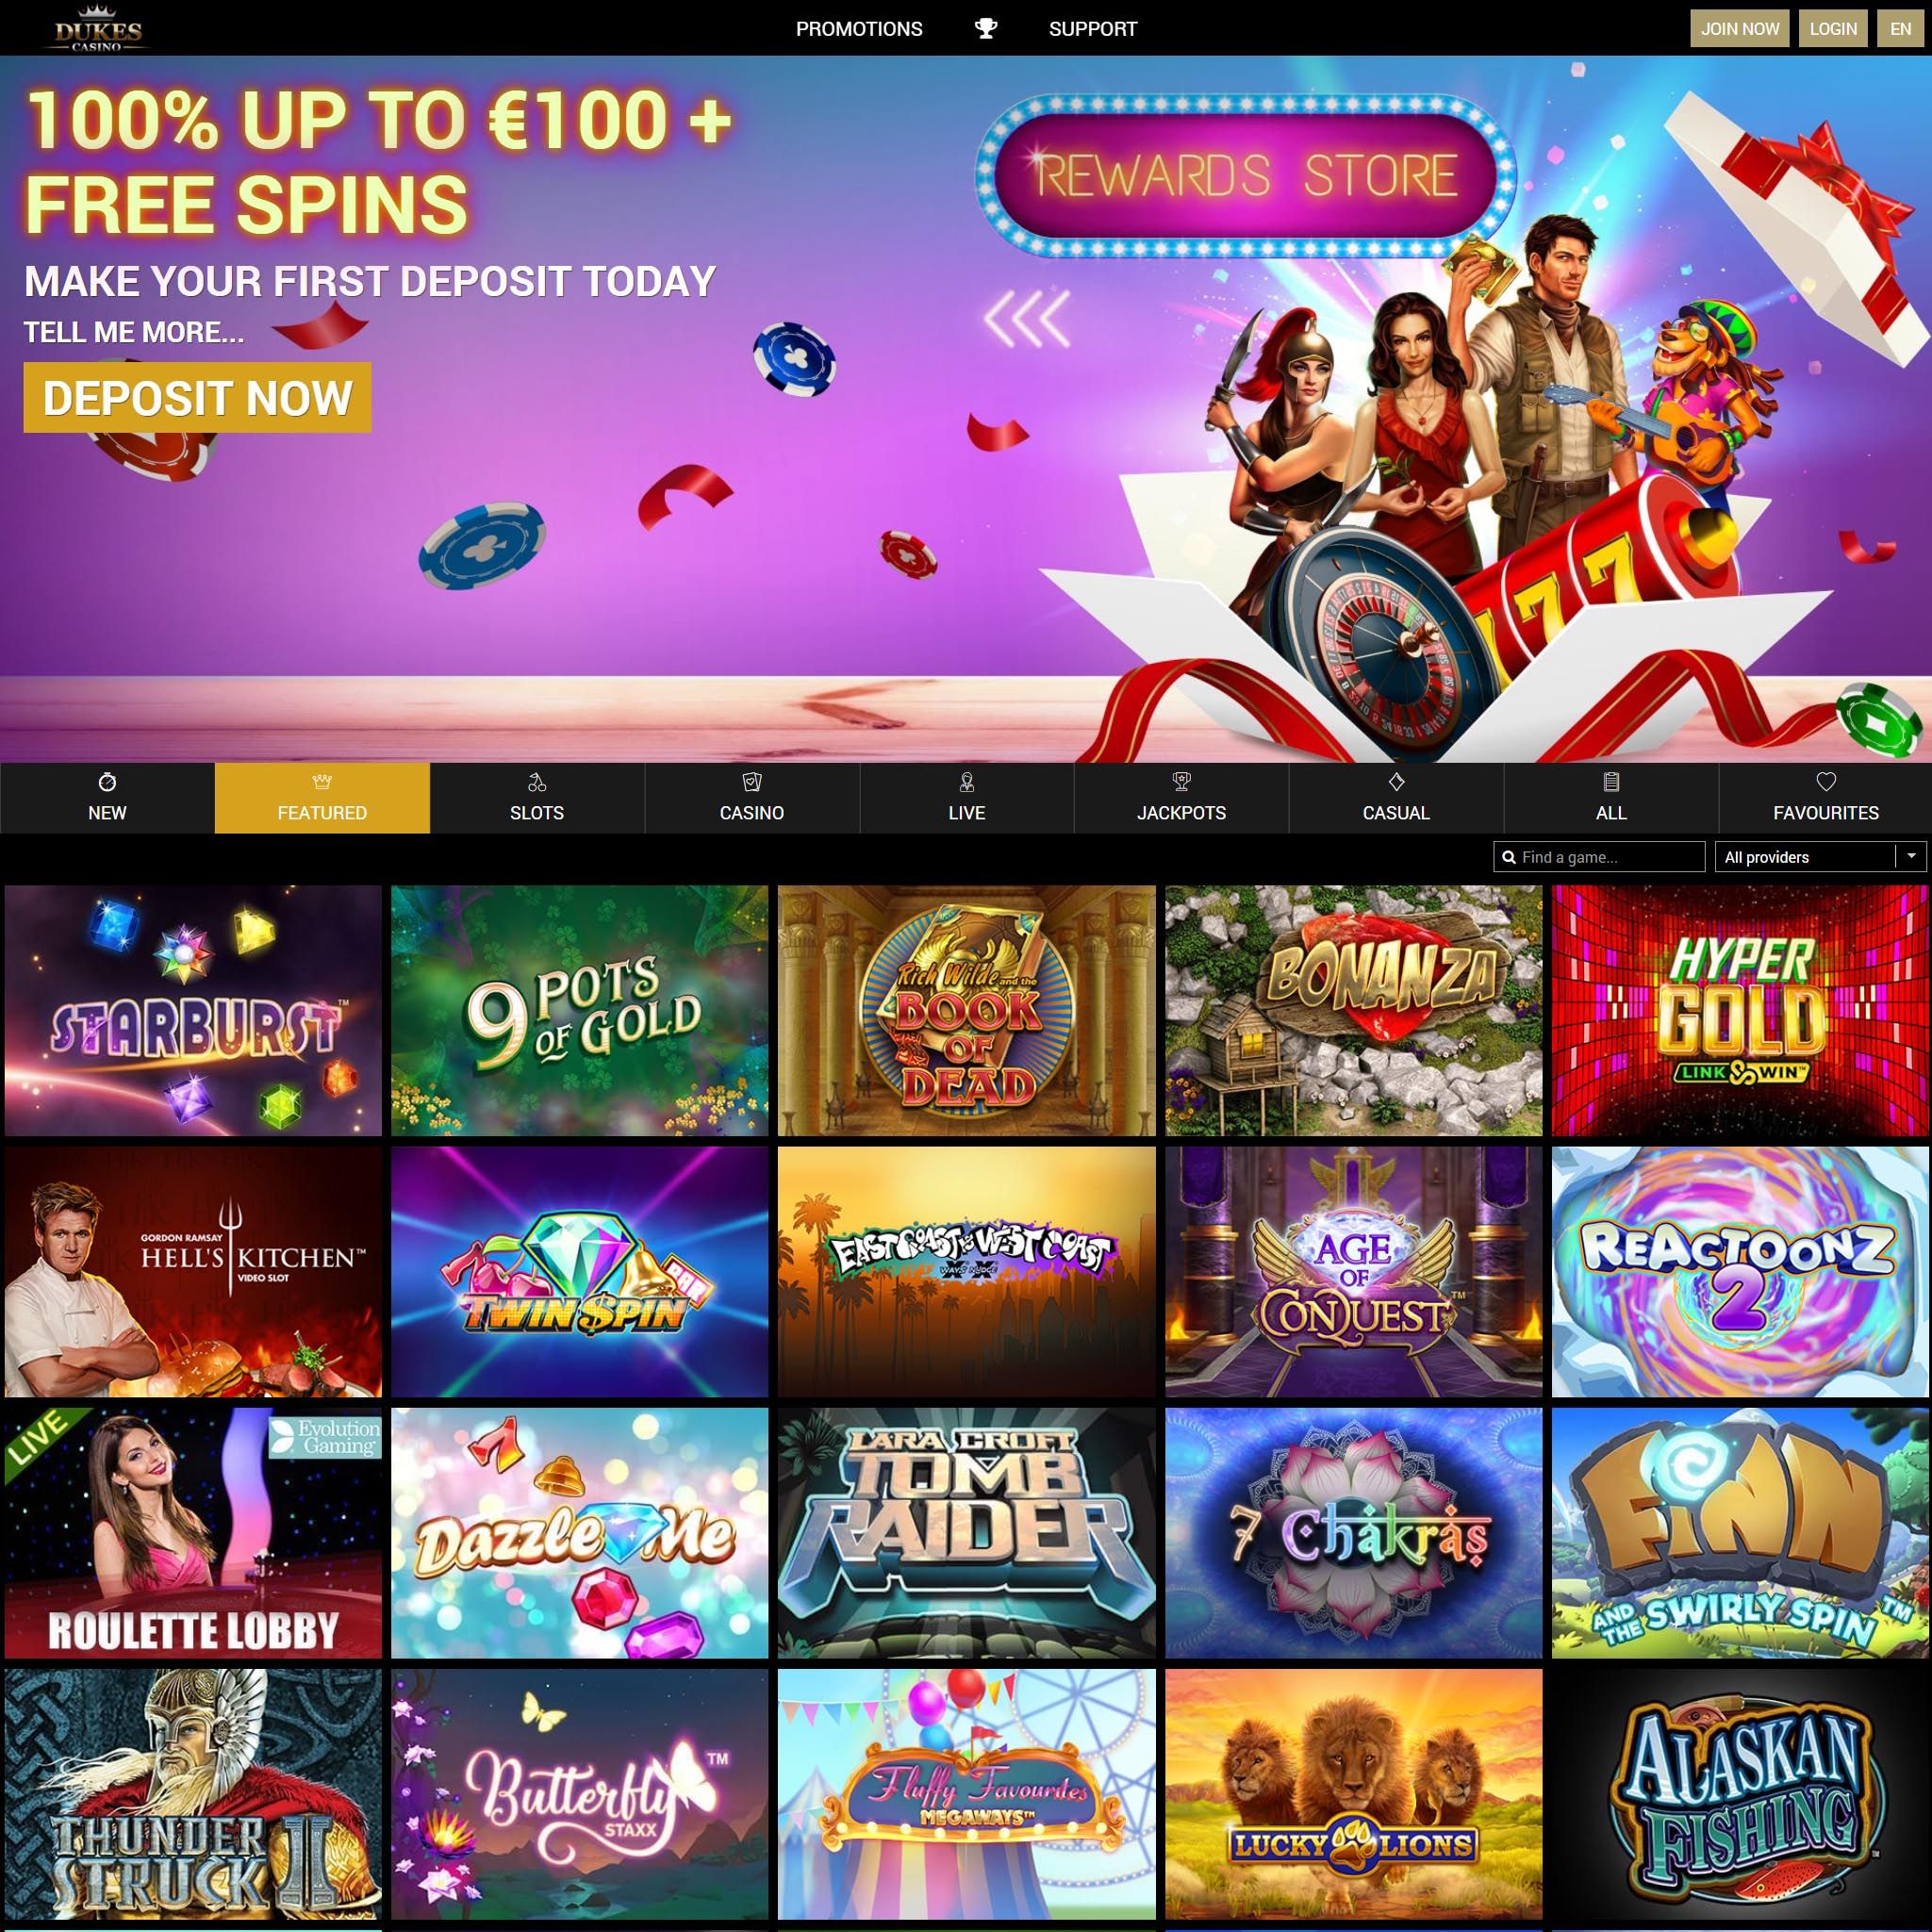 Bet Dukes Casino review by Mr. Gamble